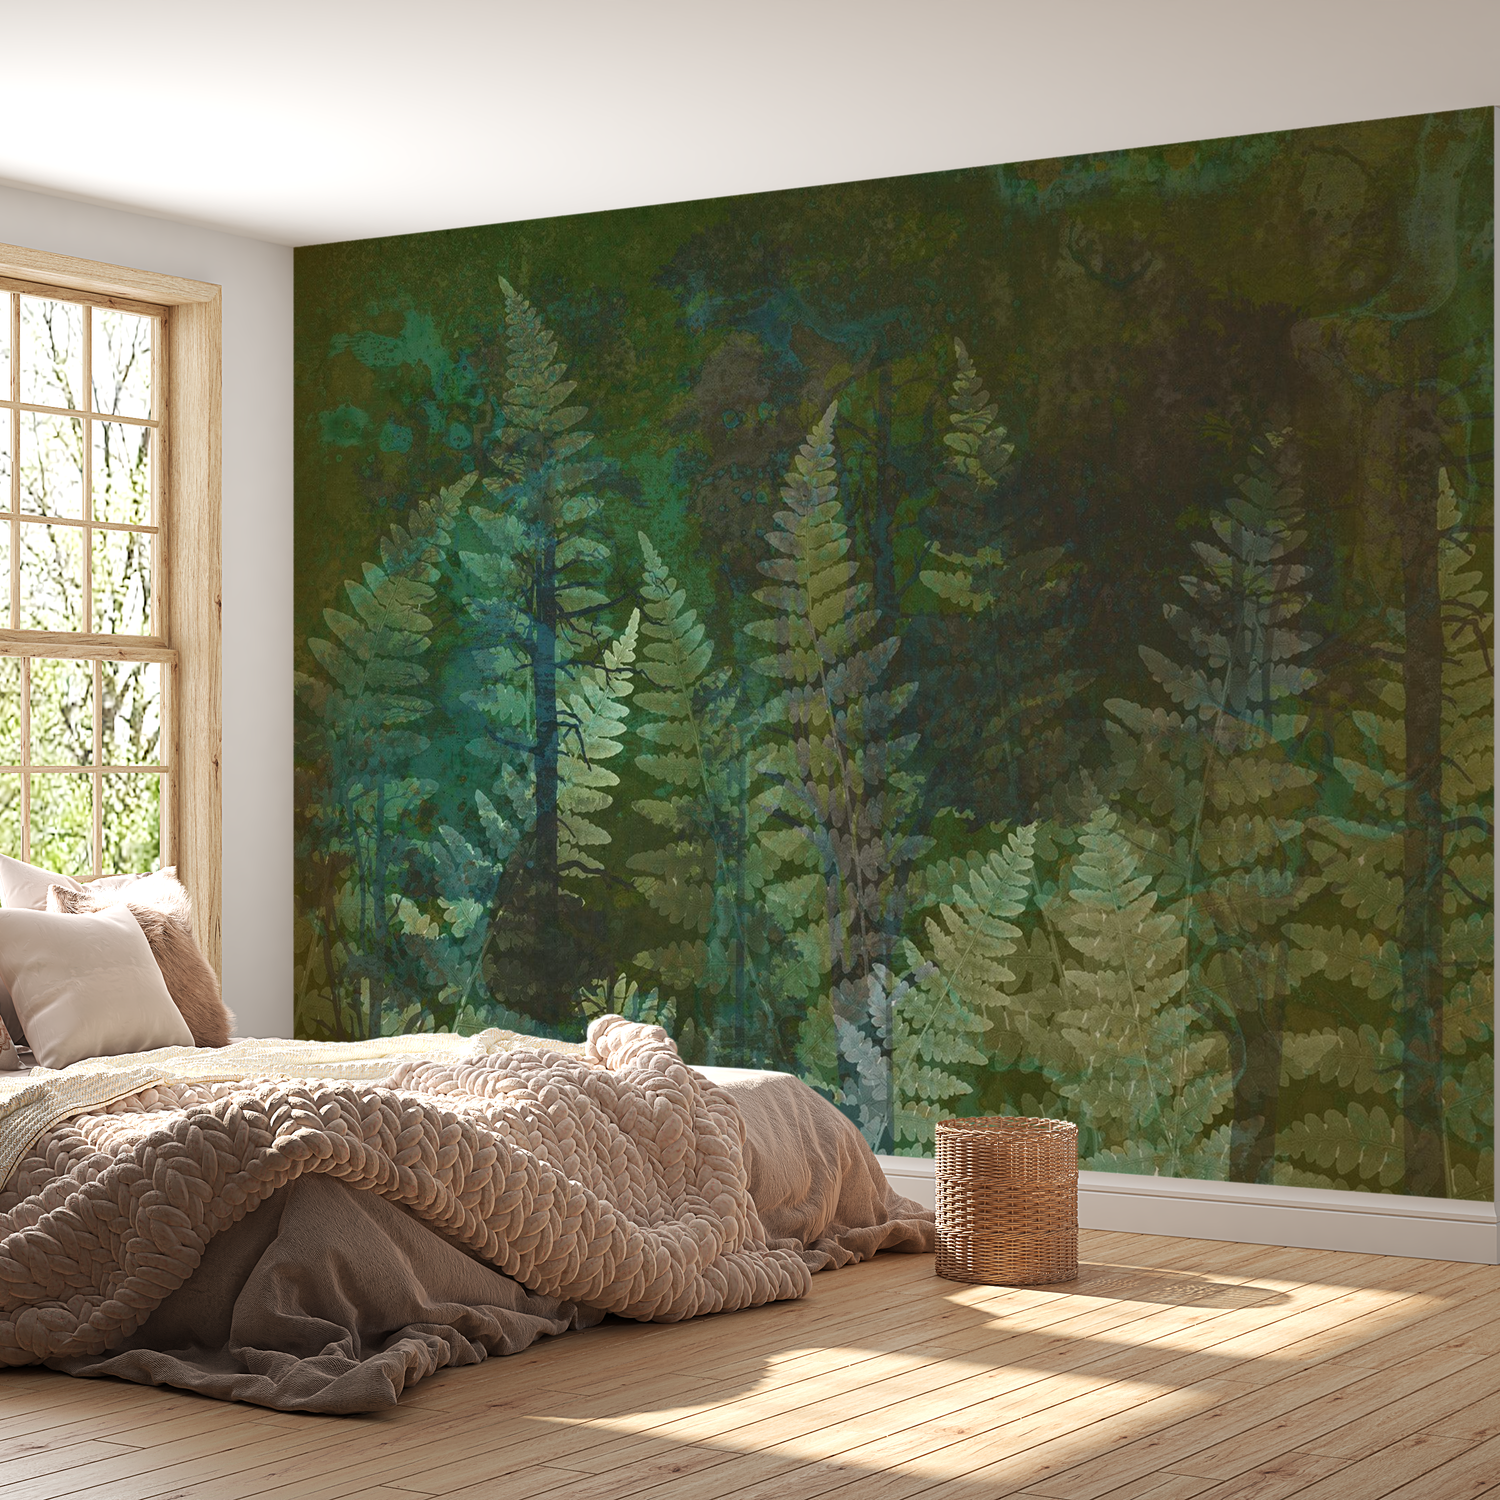 Peel & Stick Botanical Wall Mural - Green Abstract Ferns - Removable Wallpaper 38"Wx27"H